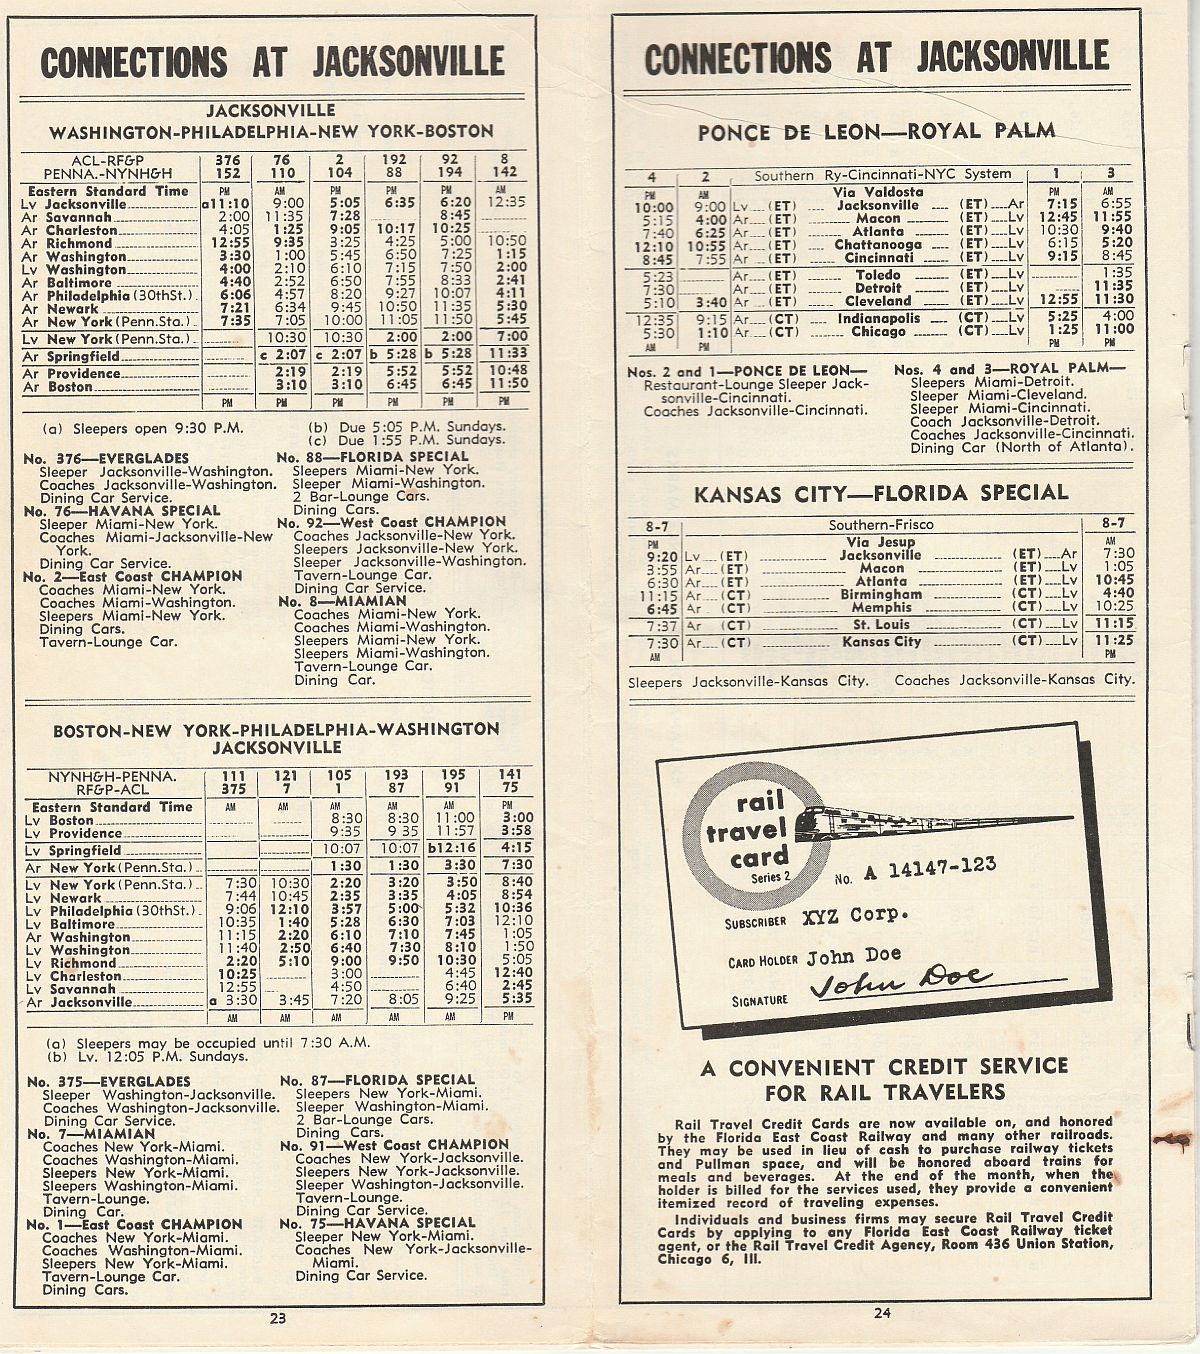 Florida East Coast Railway Dec. 12, 1957 timetable Pg. 23-24: Connections at Jacksonville Connecting trains at Jacksonville with the Atlantic Coast Line, R.F. & P., Pennsylvania, New Haven, Southern, New York Central and Frisco Railroads; Ad: Rail Travel Card